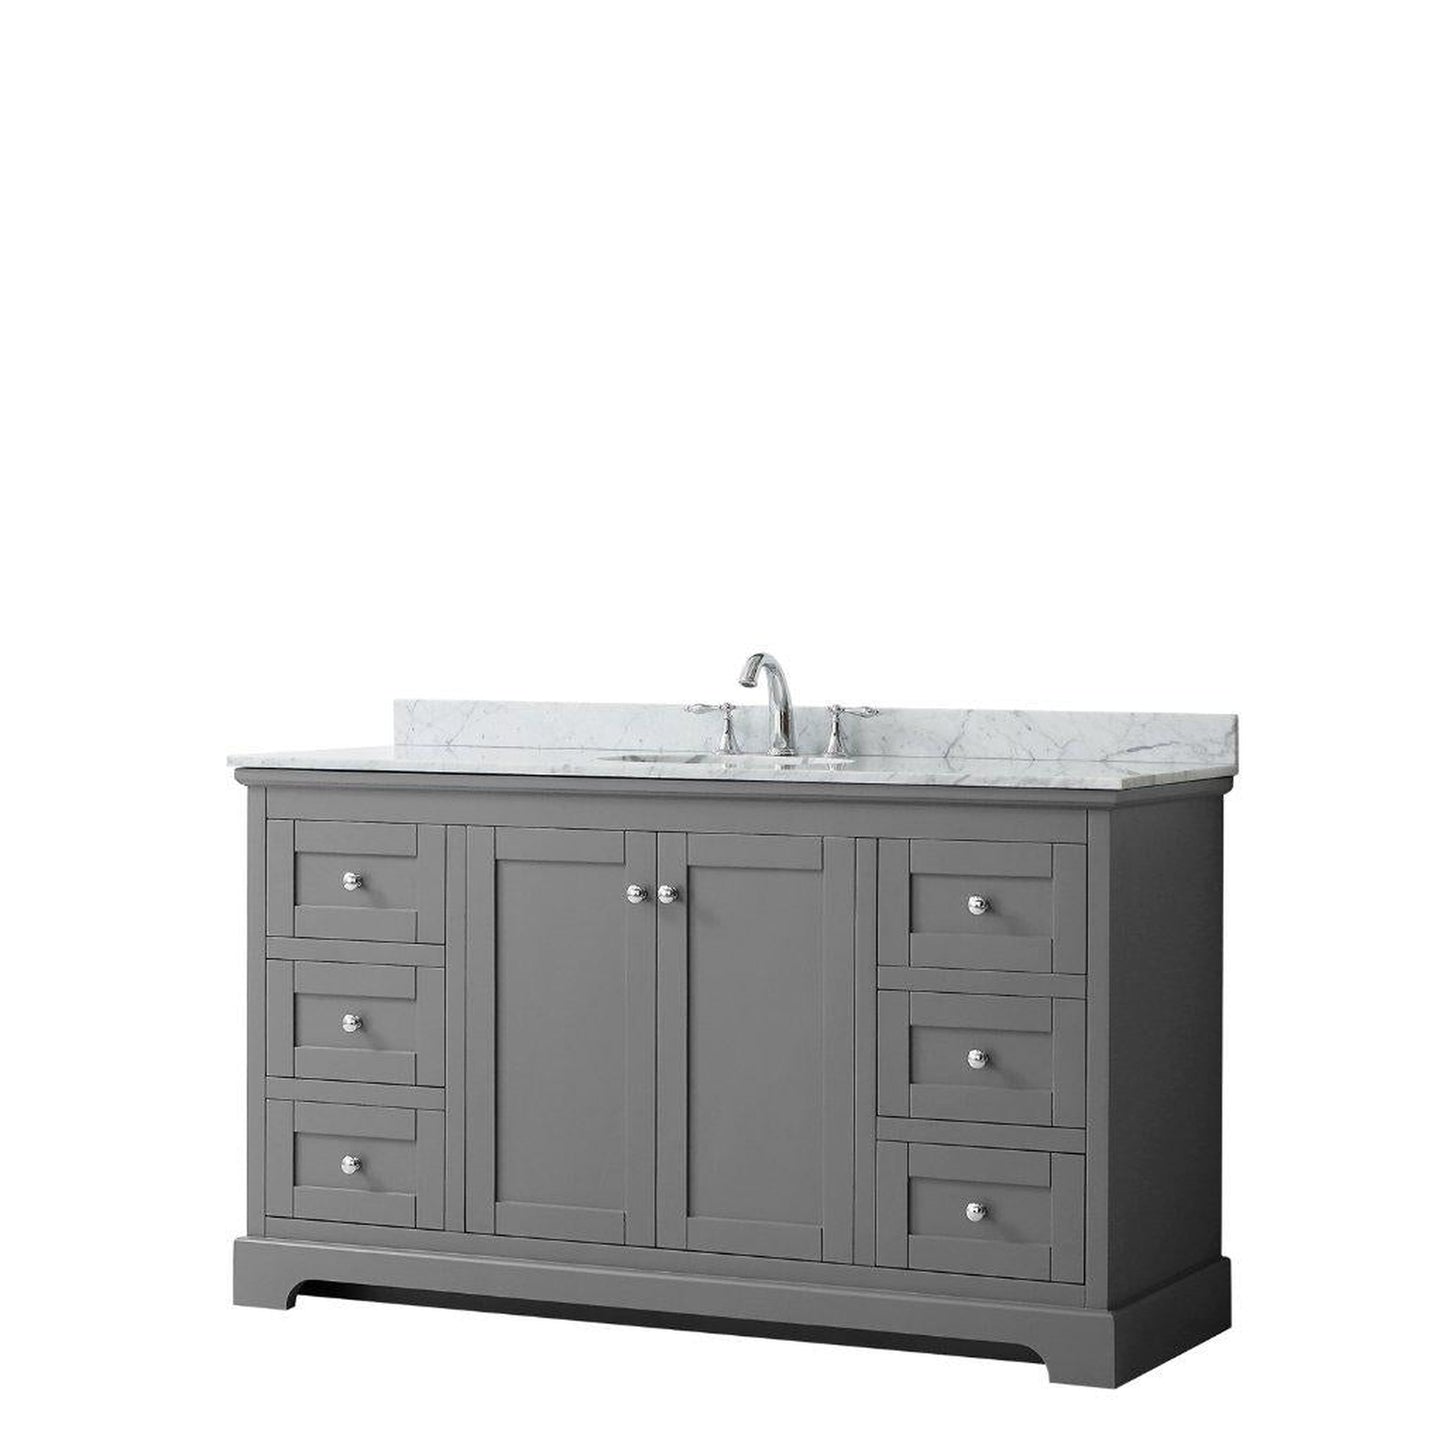 Wyndham Collection Avery 60" Dark Gray Single Bathroom Vanity With White Carrara Marble Countertop With 3-Hole Faucet And 8" Oval Sink